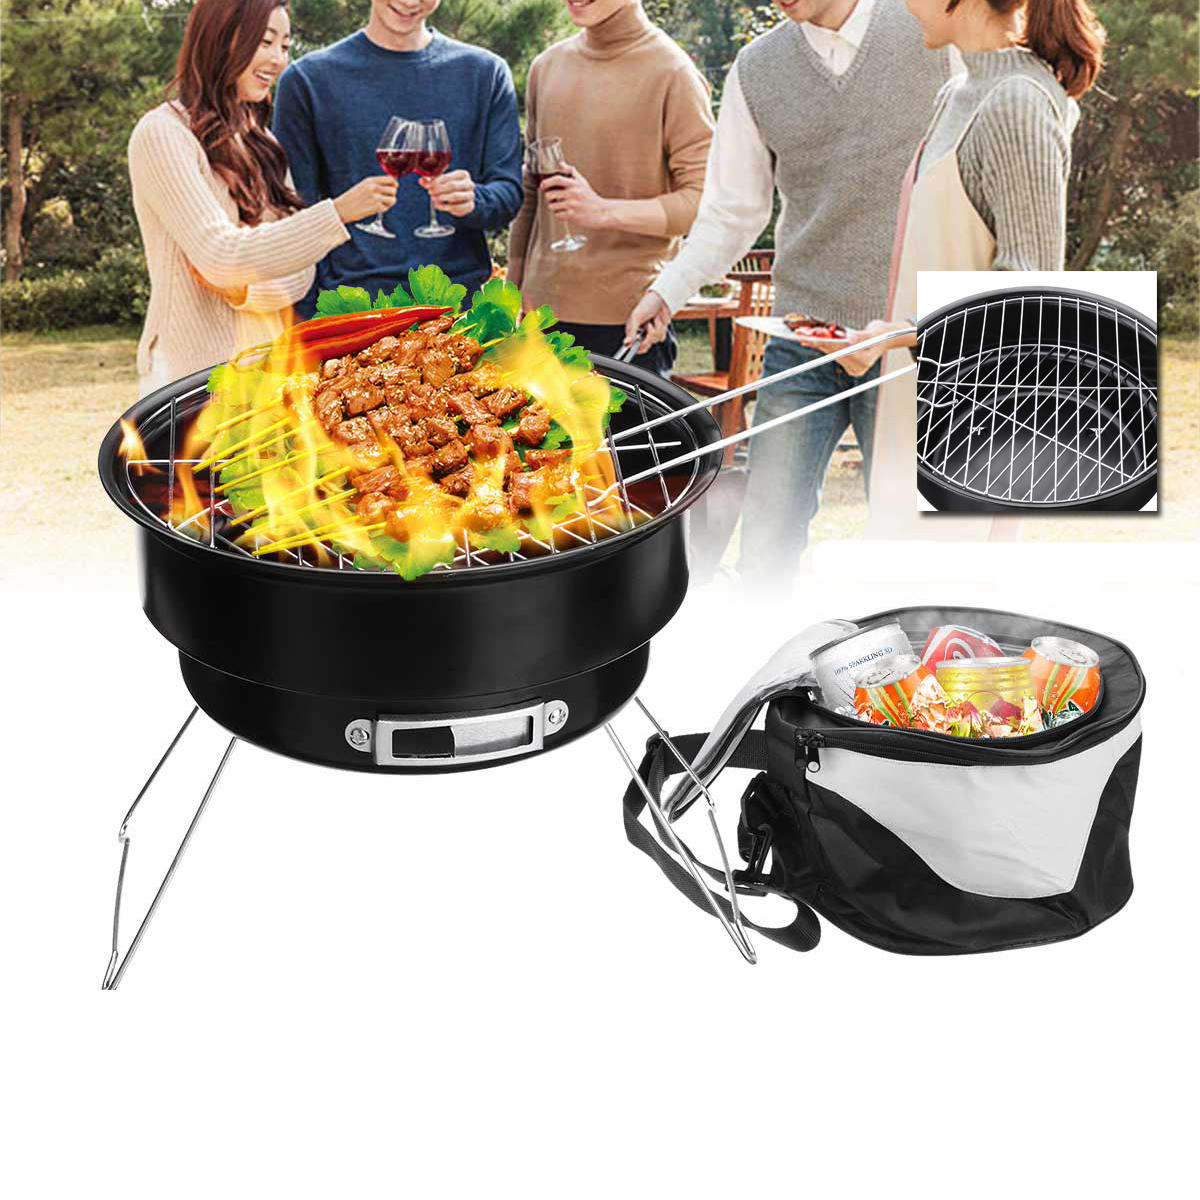 2 In 1 Portable Barbecue Oven Folding BBQ Grill With Cooler Bag Camping Hiking Picnic